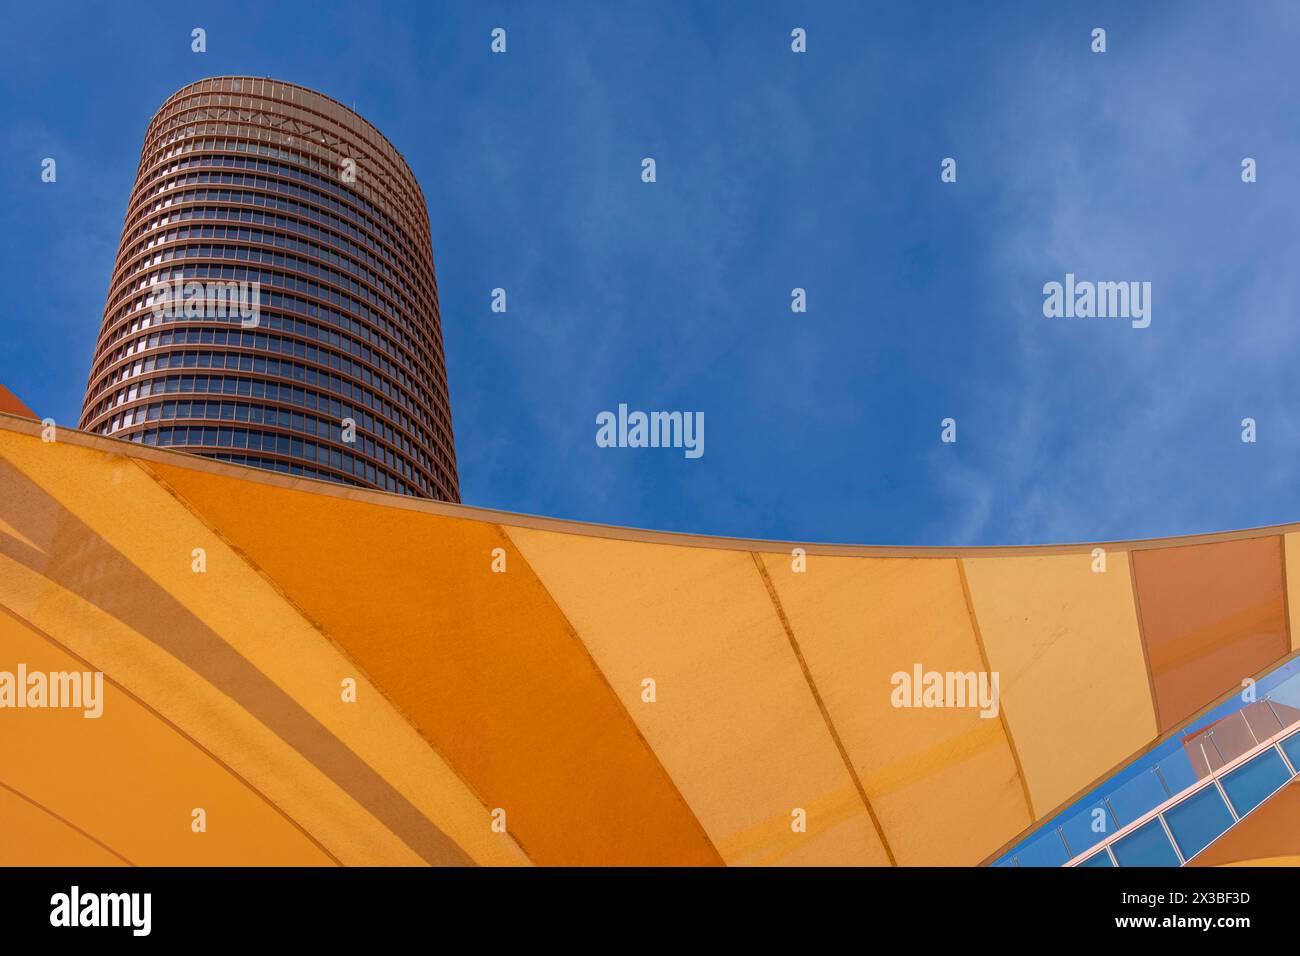 Modern skyscraper with orange accents viewed from below against a clear blue sky, Torre Sevilla, Seville, Andalusia, Spain Stock Photo